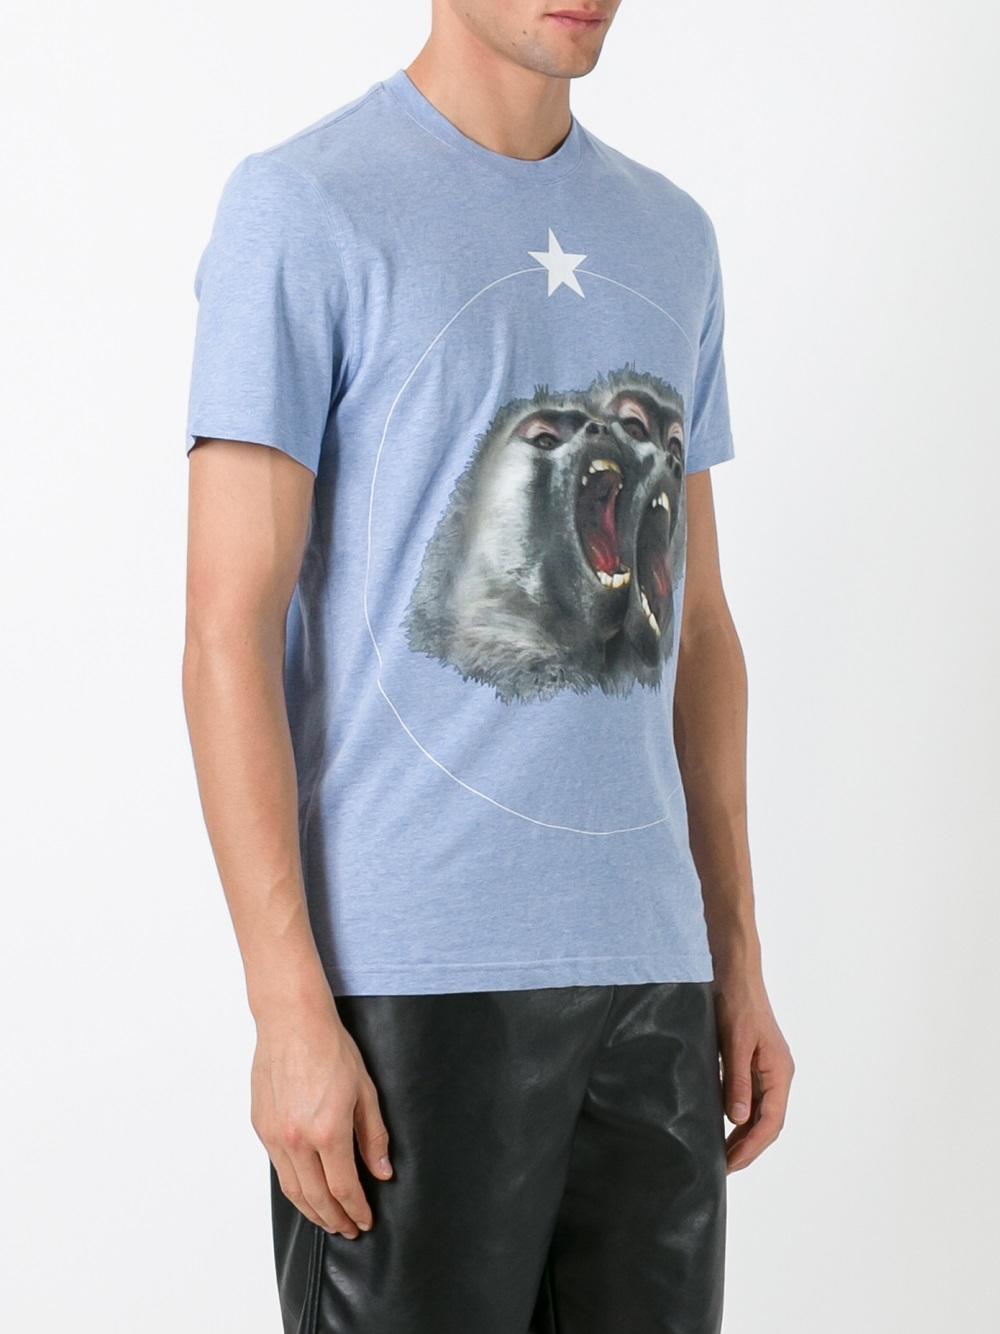 givenchy t shirt monkey brothers